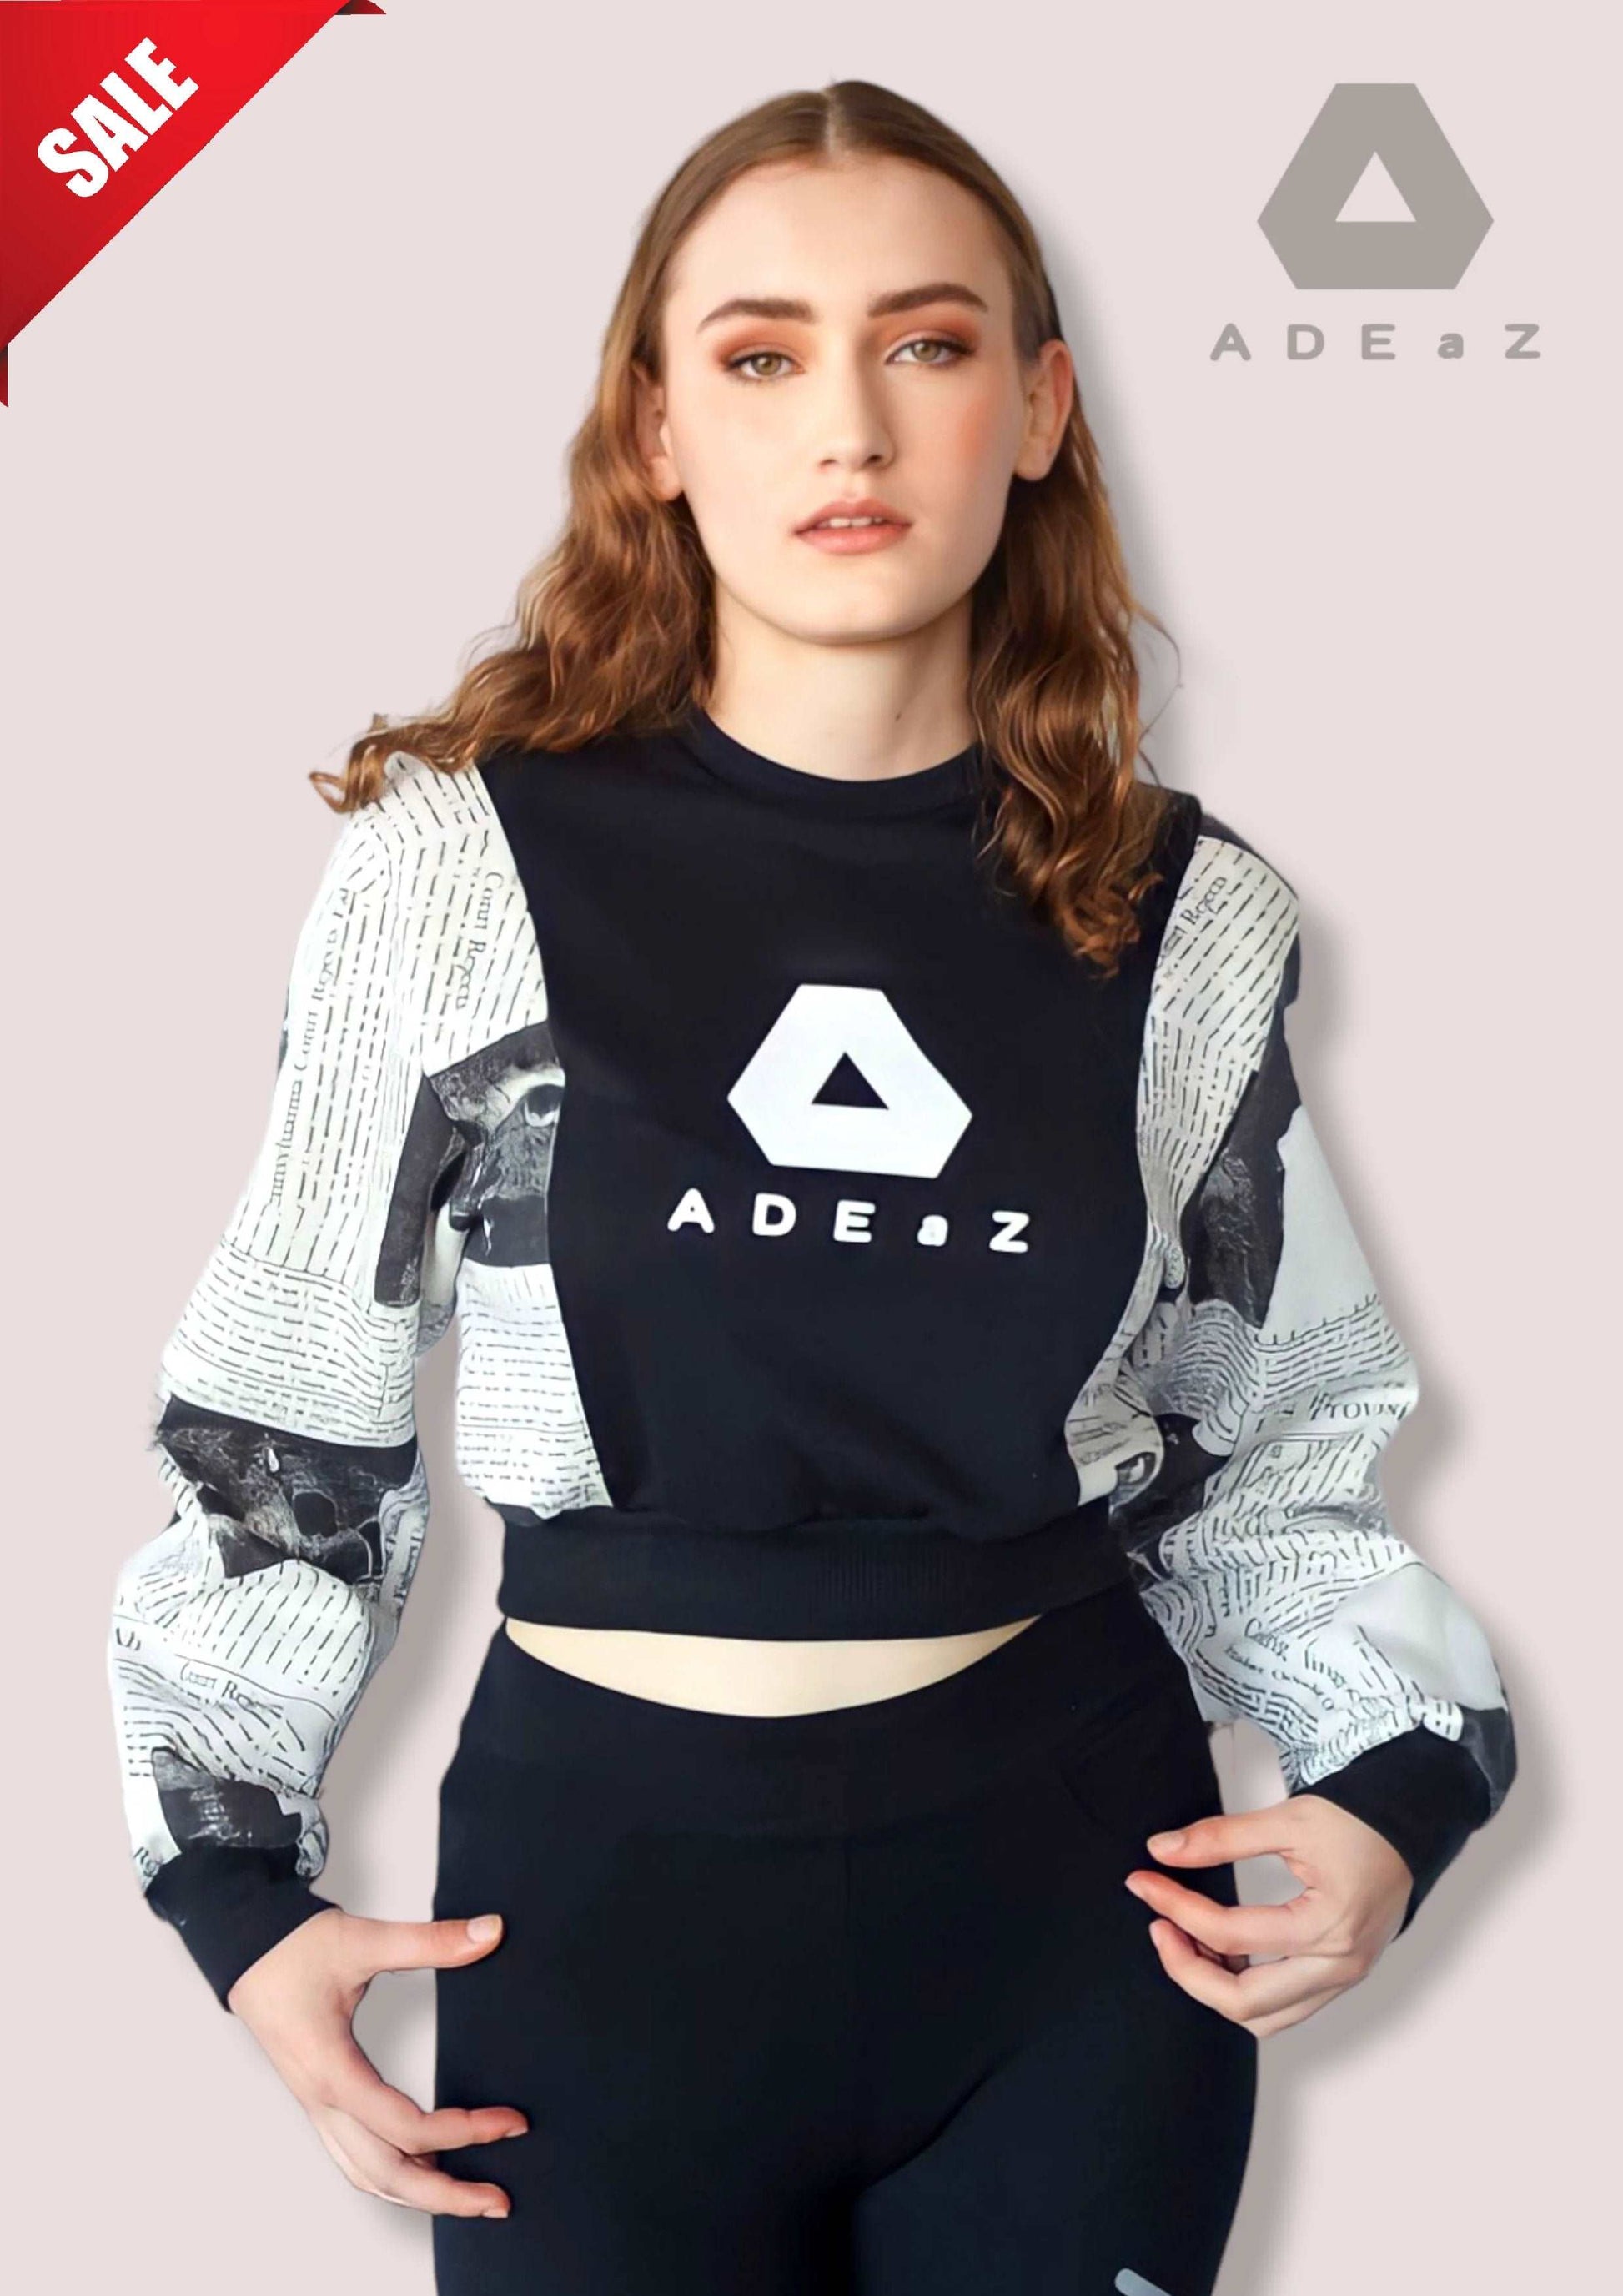 Fleece long sleeve paper print hot crop top for women, a unique blend of warmth and style with artistic patterns